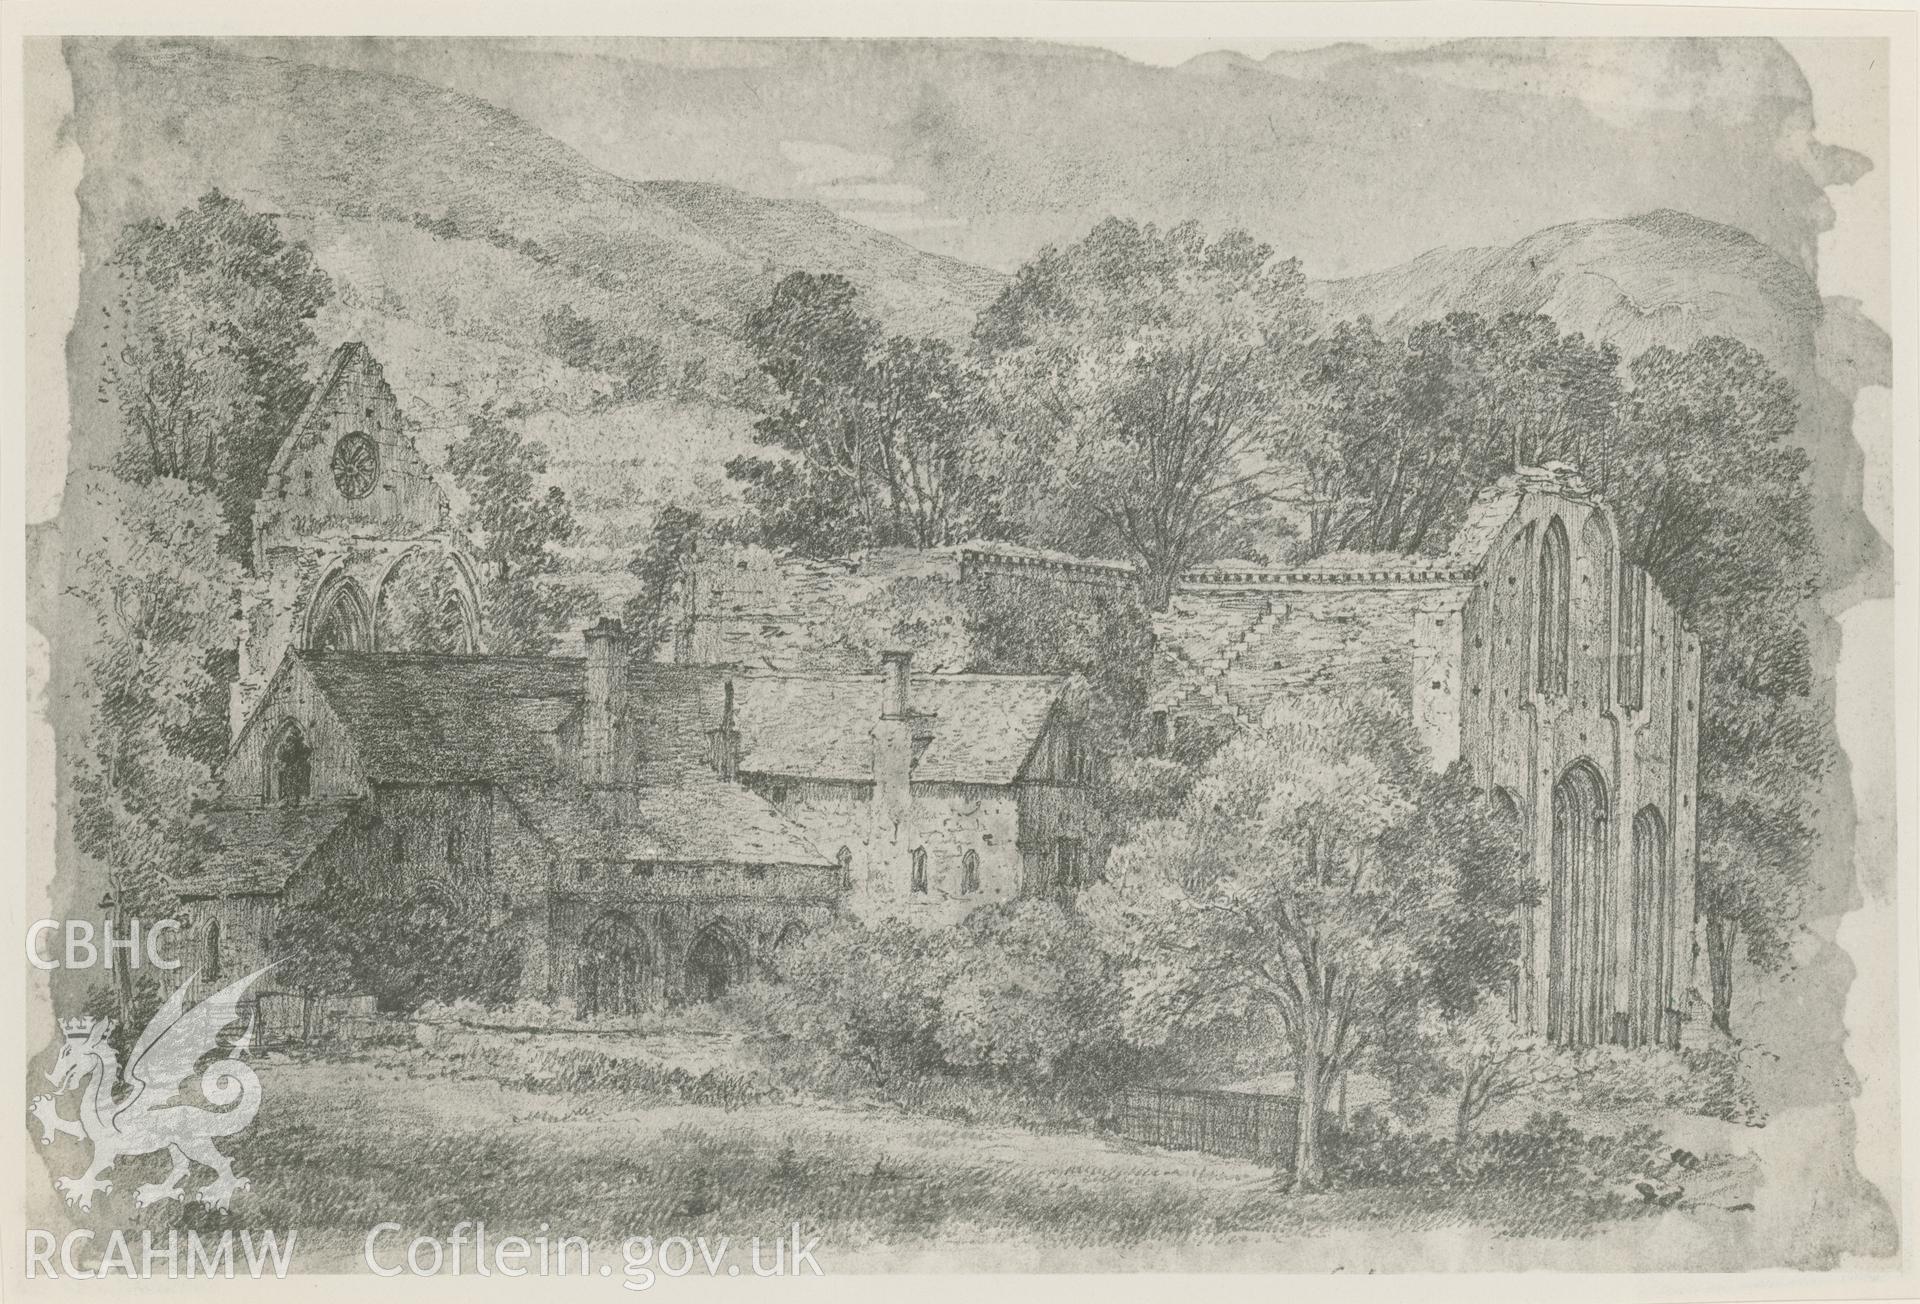 Photograph by D. Macbeth, of an illustration showing general view of Valle Crucis.